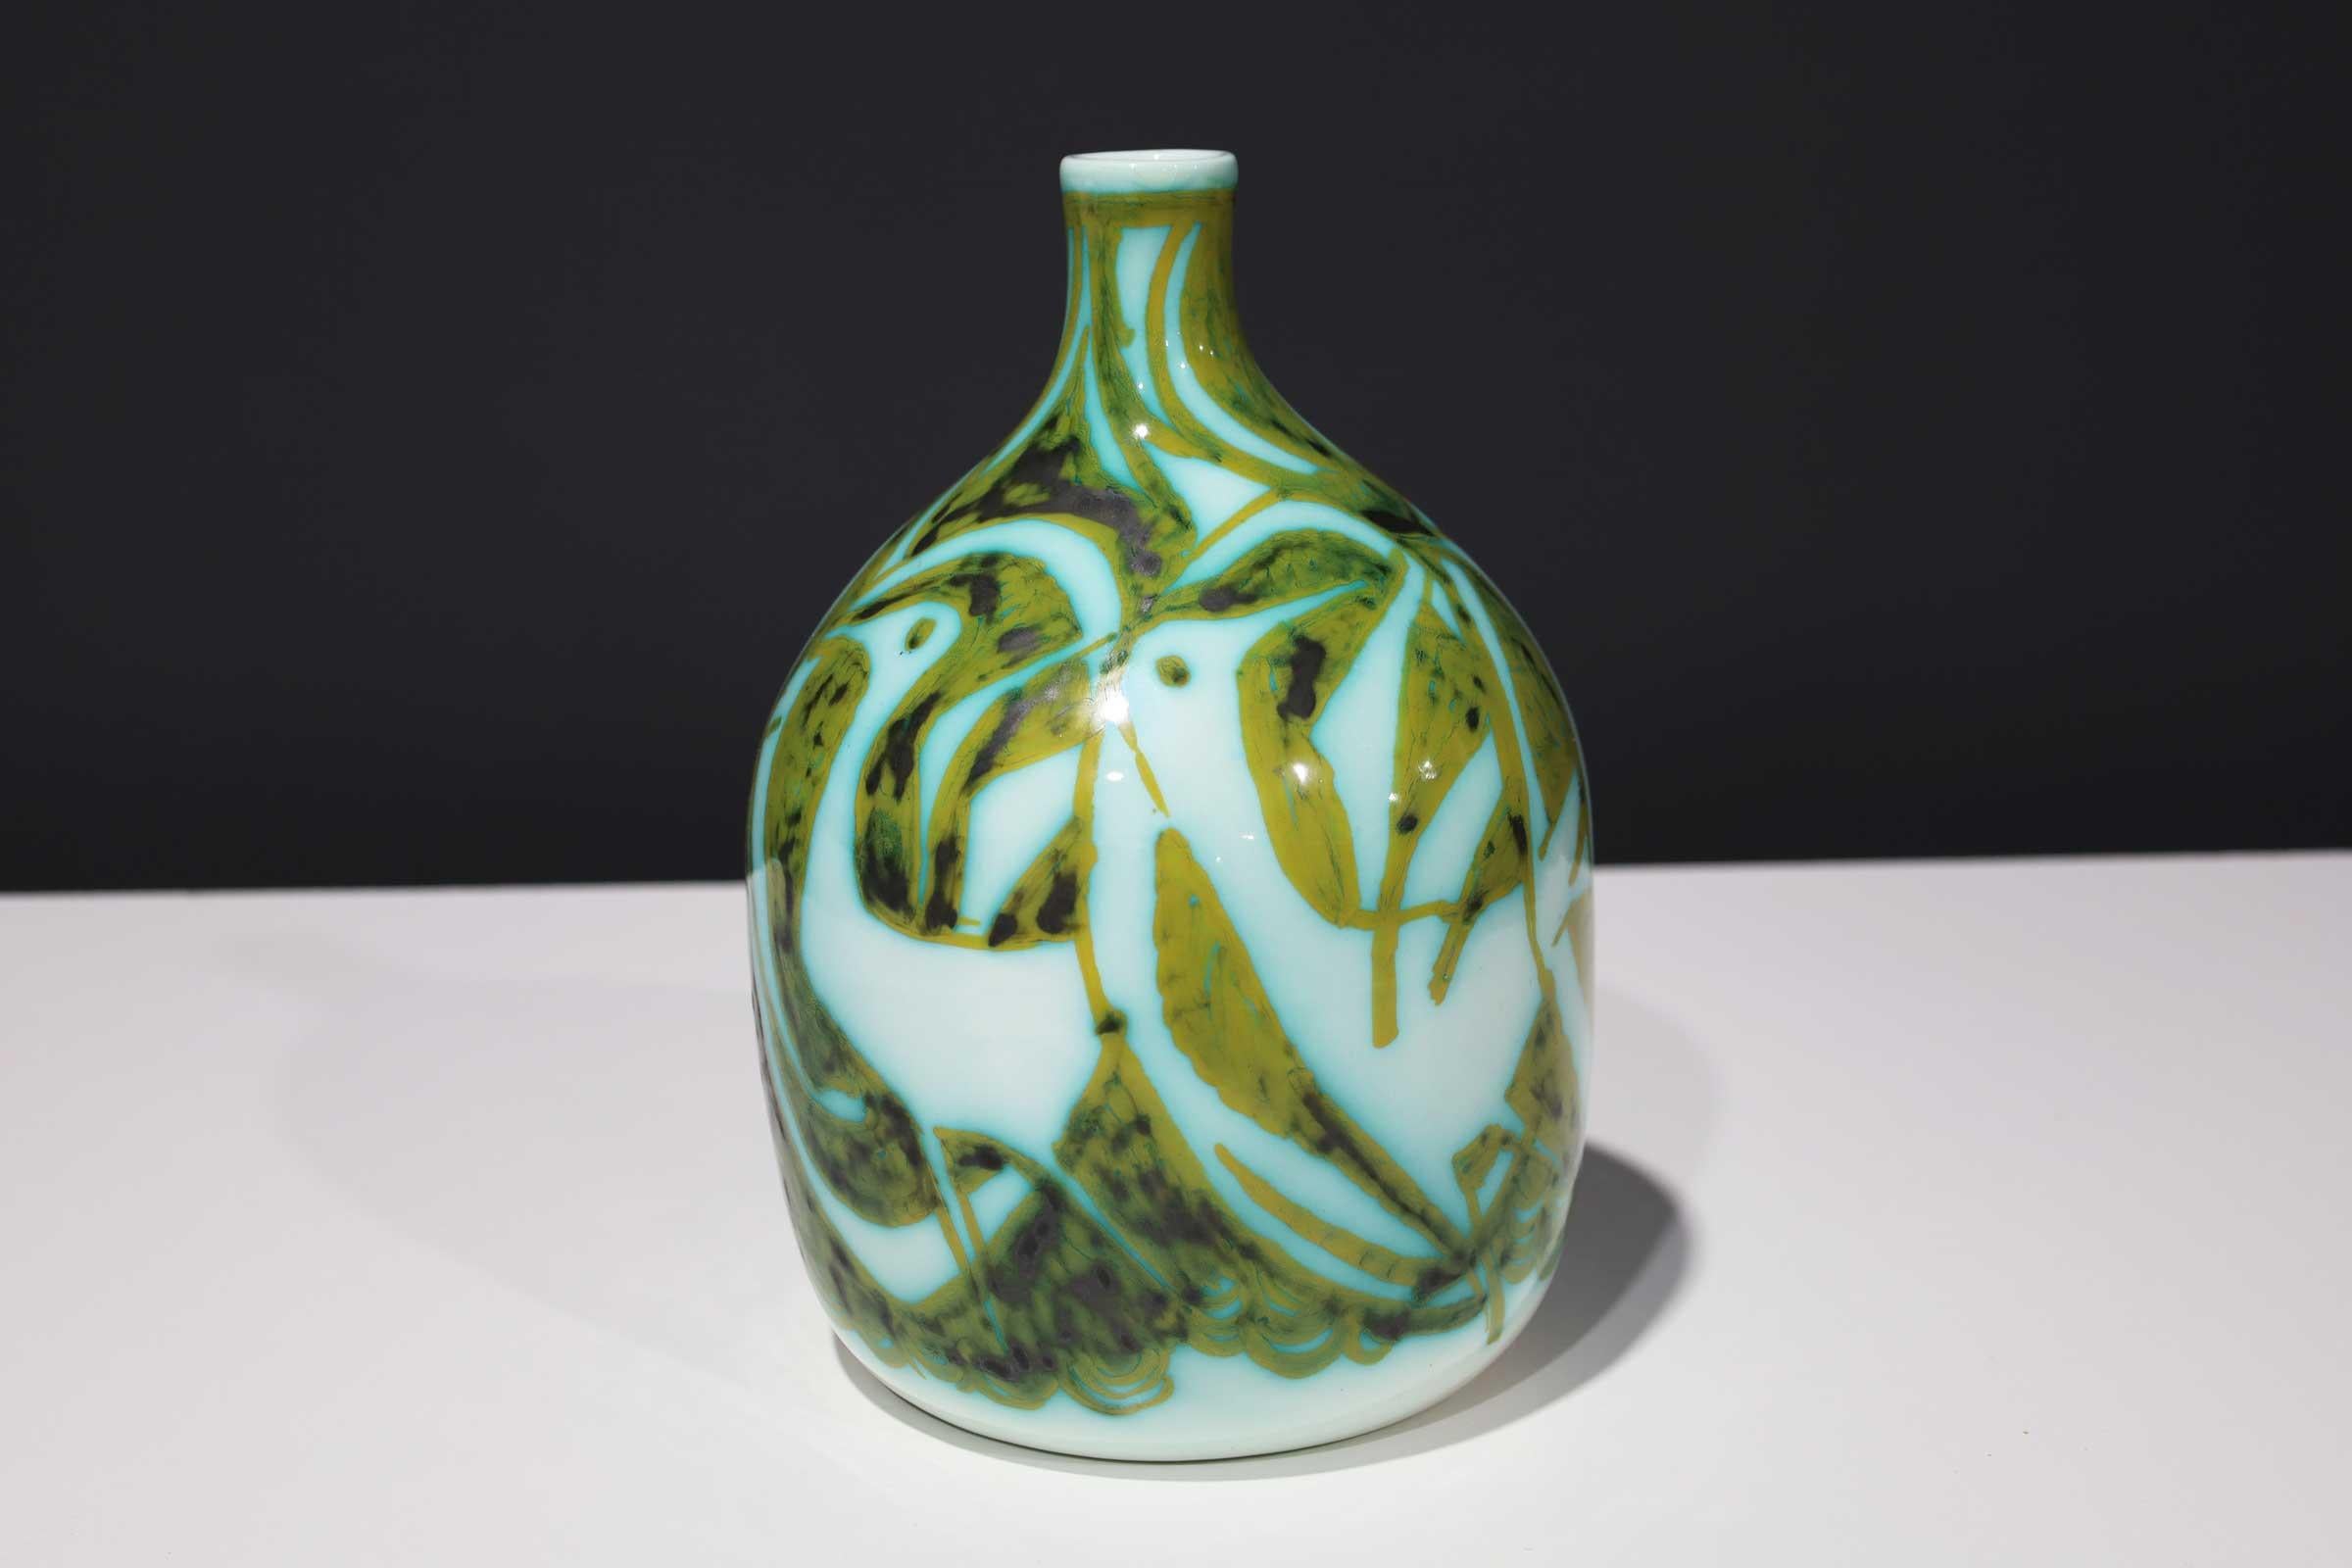 Alessio Tasca for Raymor vase, ceramic, green and white, signed.